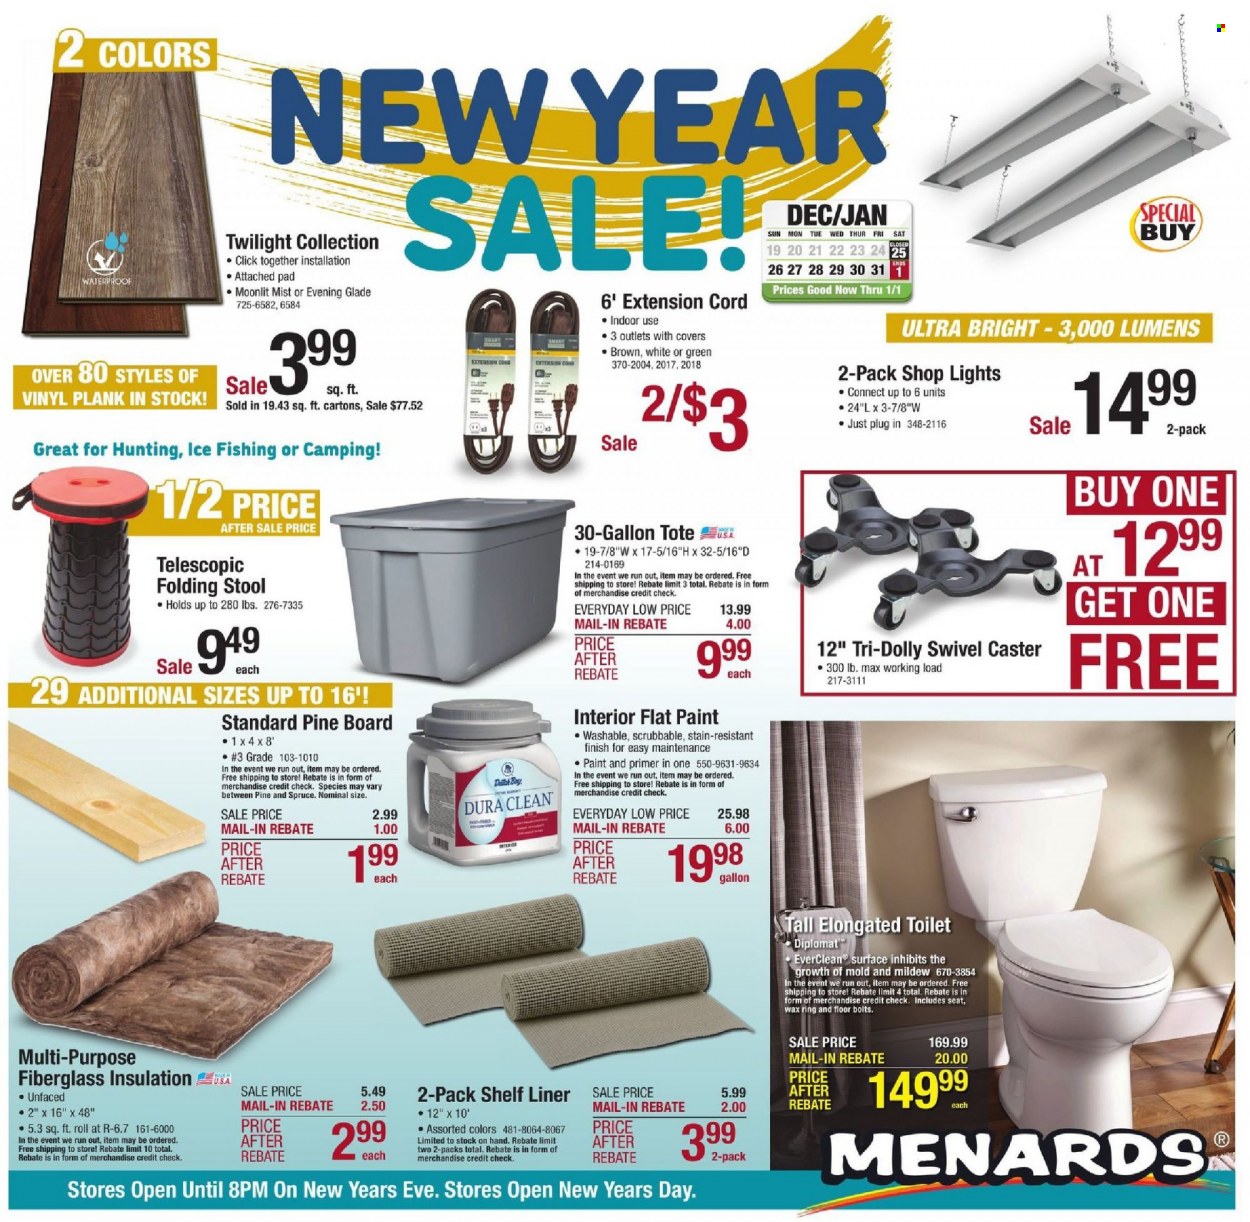 Menards Flyer - 12/25/2021 - 01/01/2022 - Sales products - toilet, Glade, stool, tote, paint, fiberglass insulation, extension cord. Page 1.